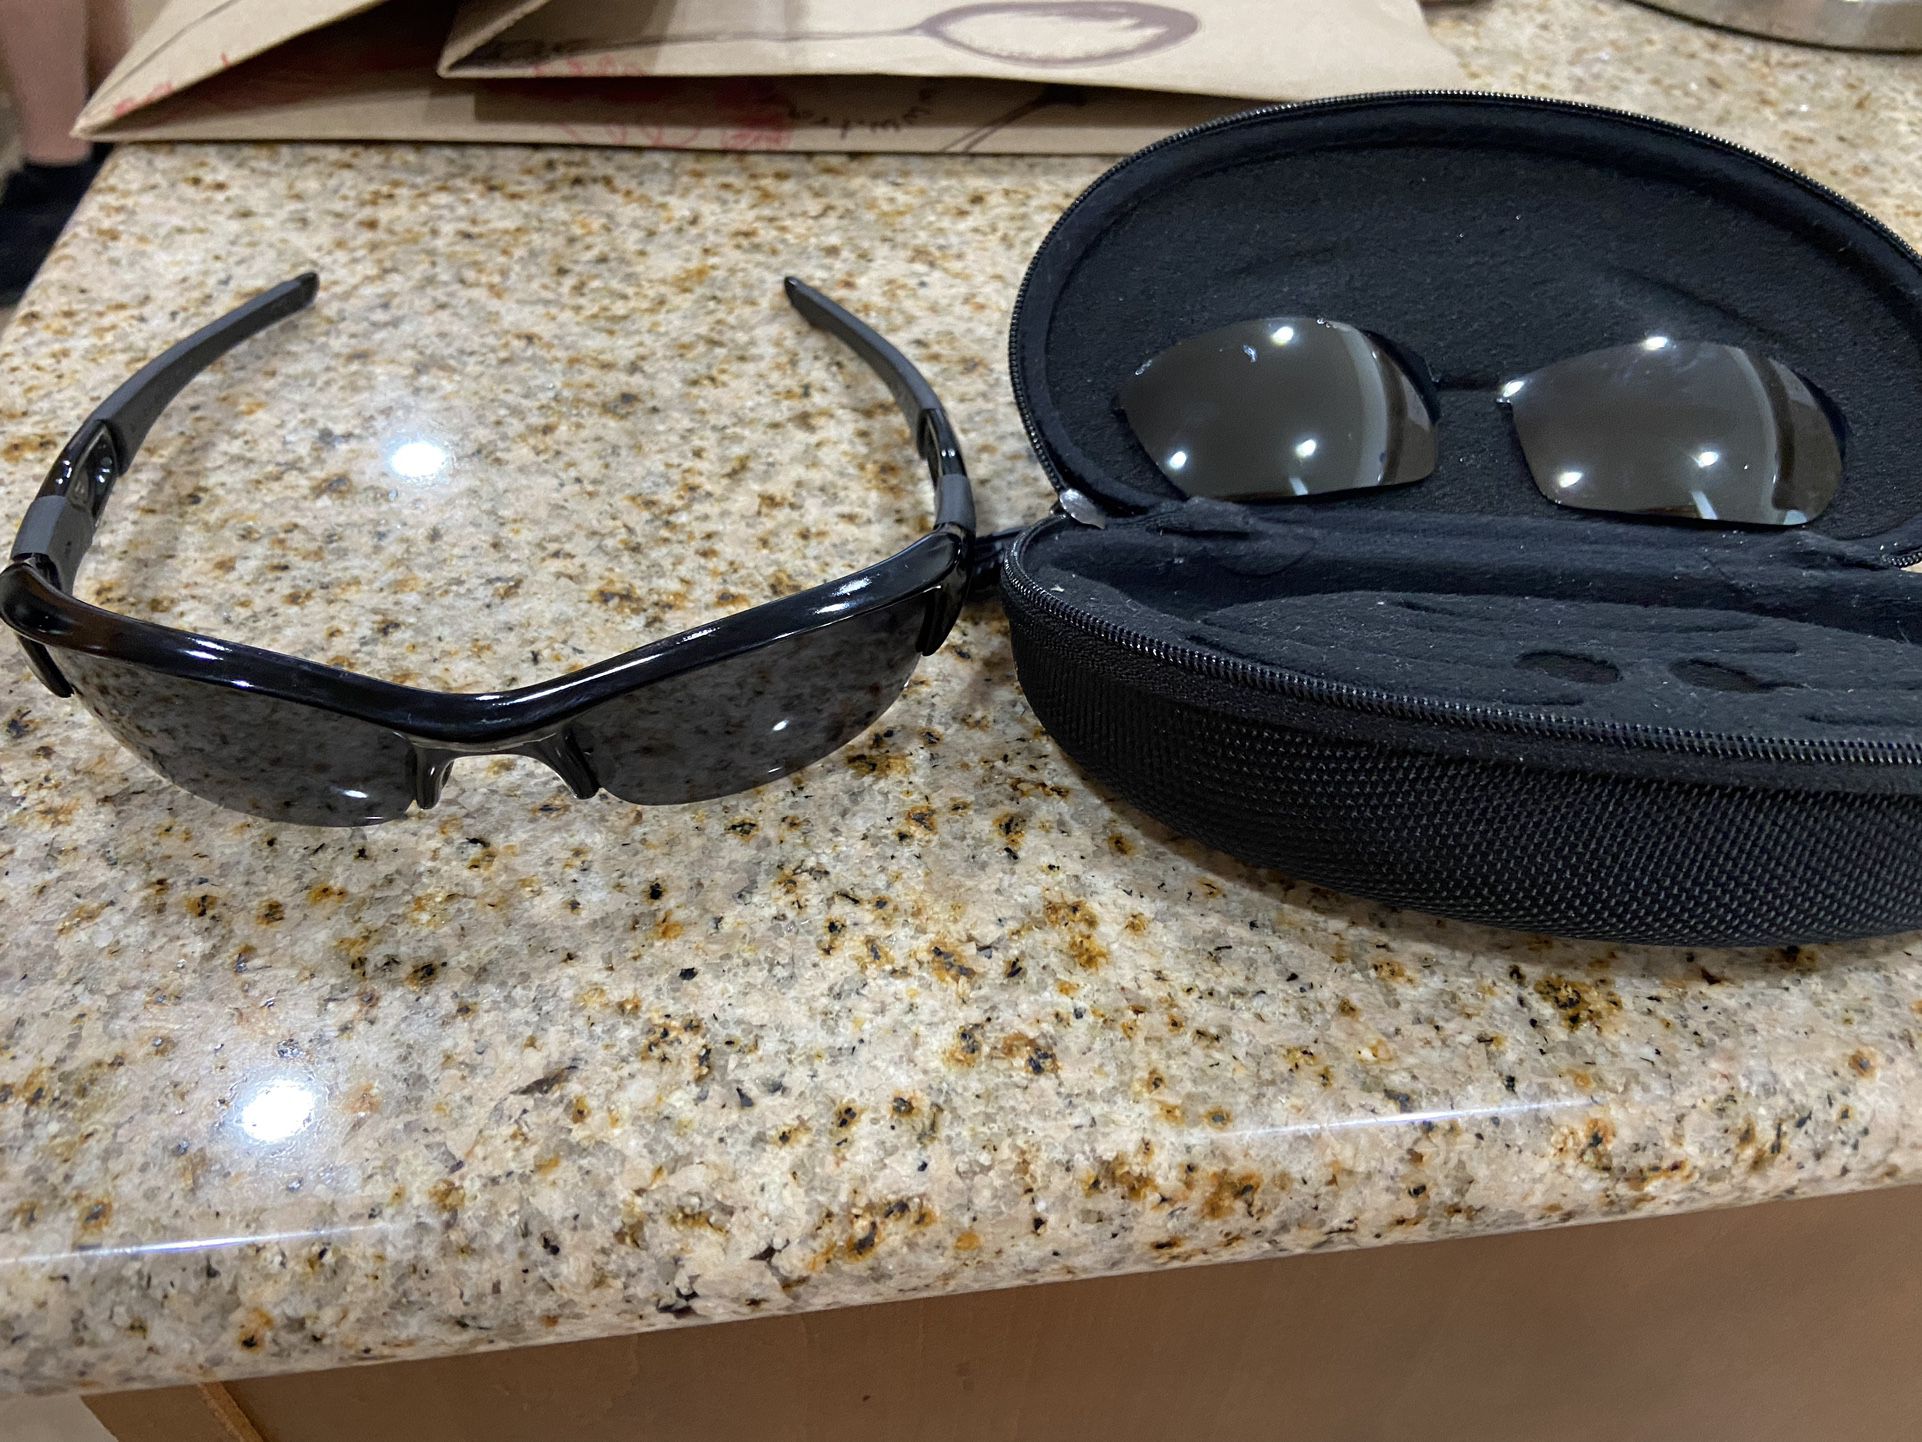 Flak Jacket Oakley sunglasses with extra aftermarket Polaroid lenses in case like new condition new cost over $130 tropicana town Center area $70